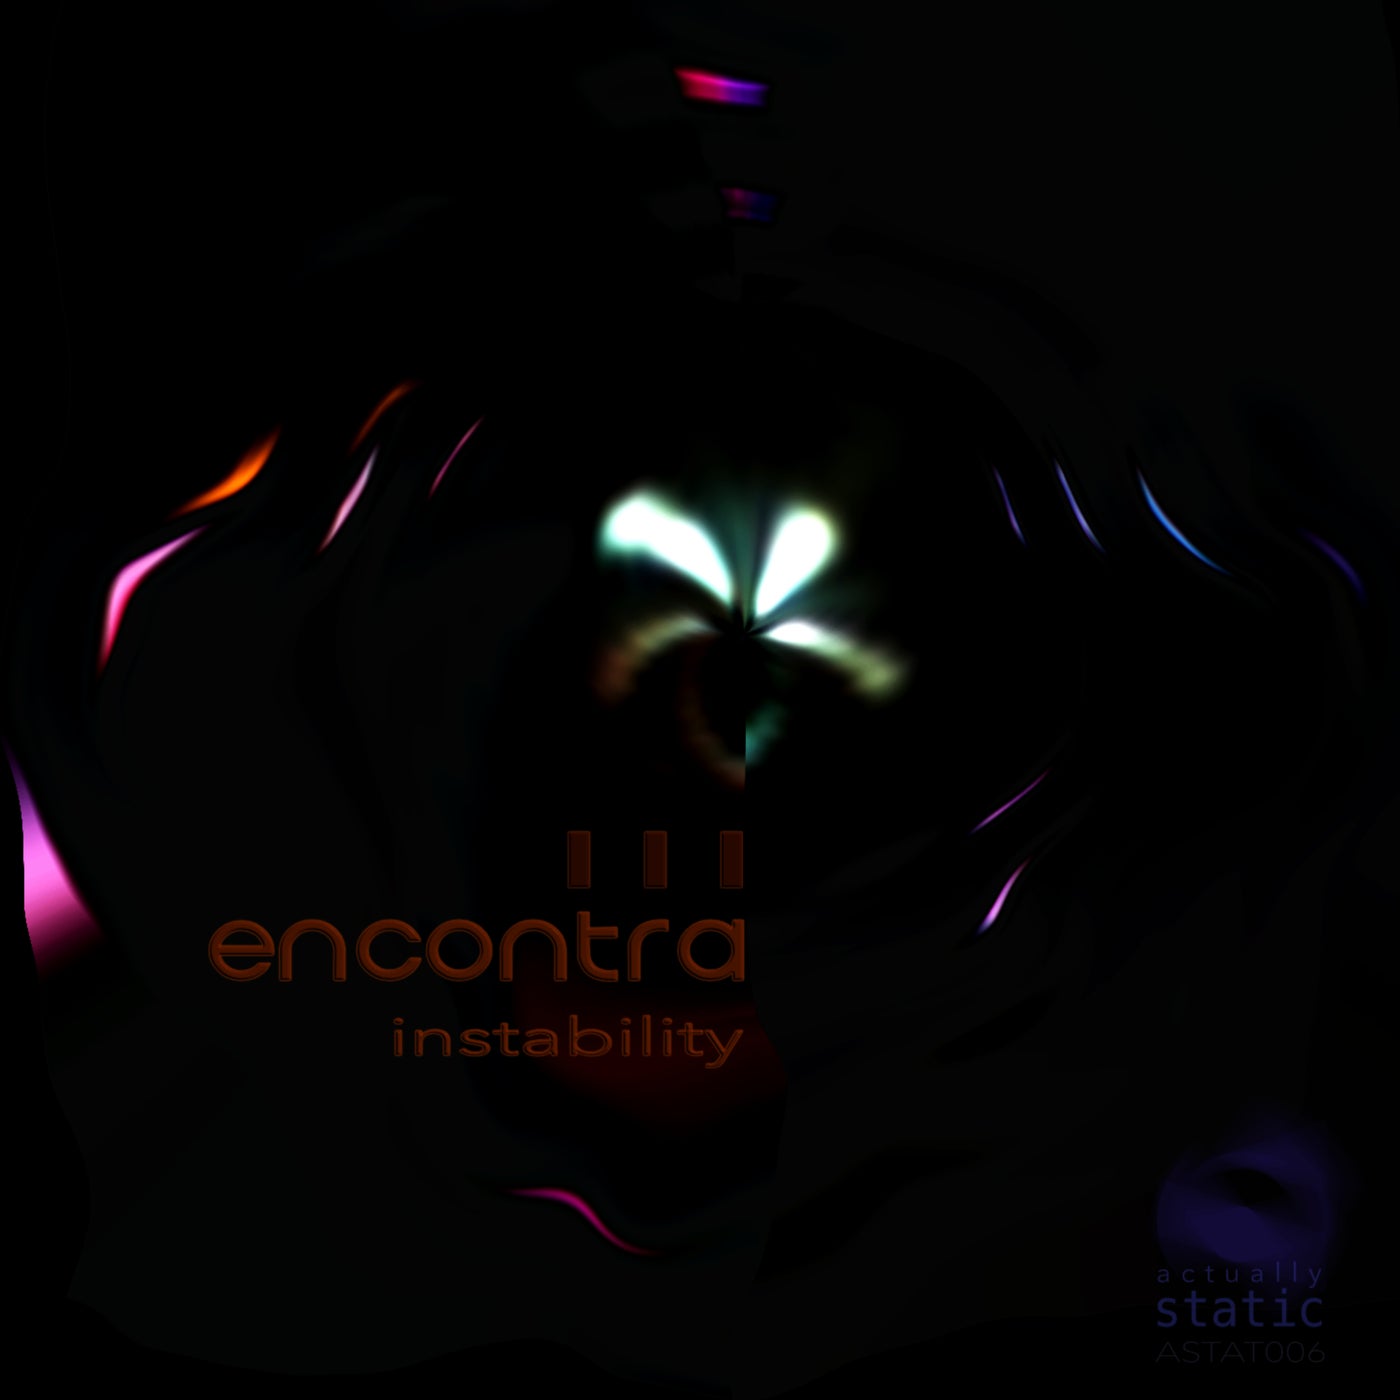 Encontra - Instability [actually static]